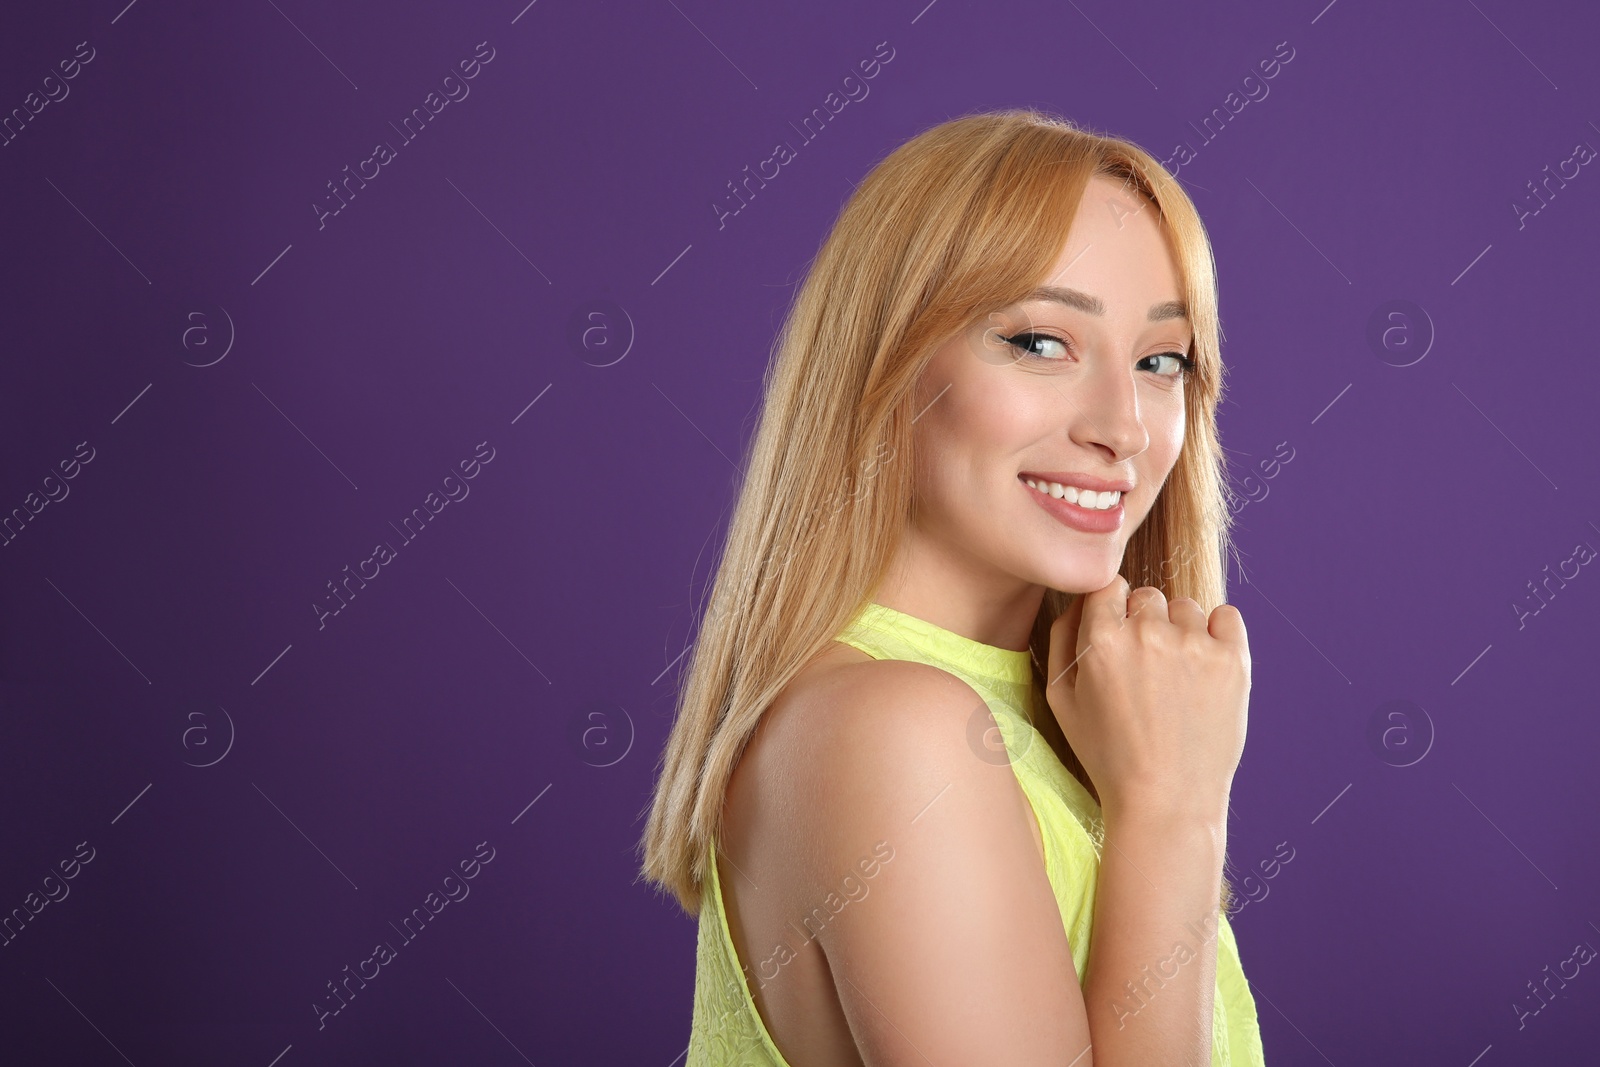 Photo of Beautiful young woman with blonde hair on purple background